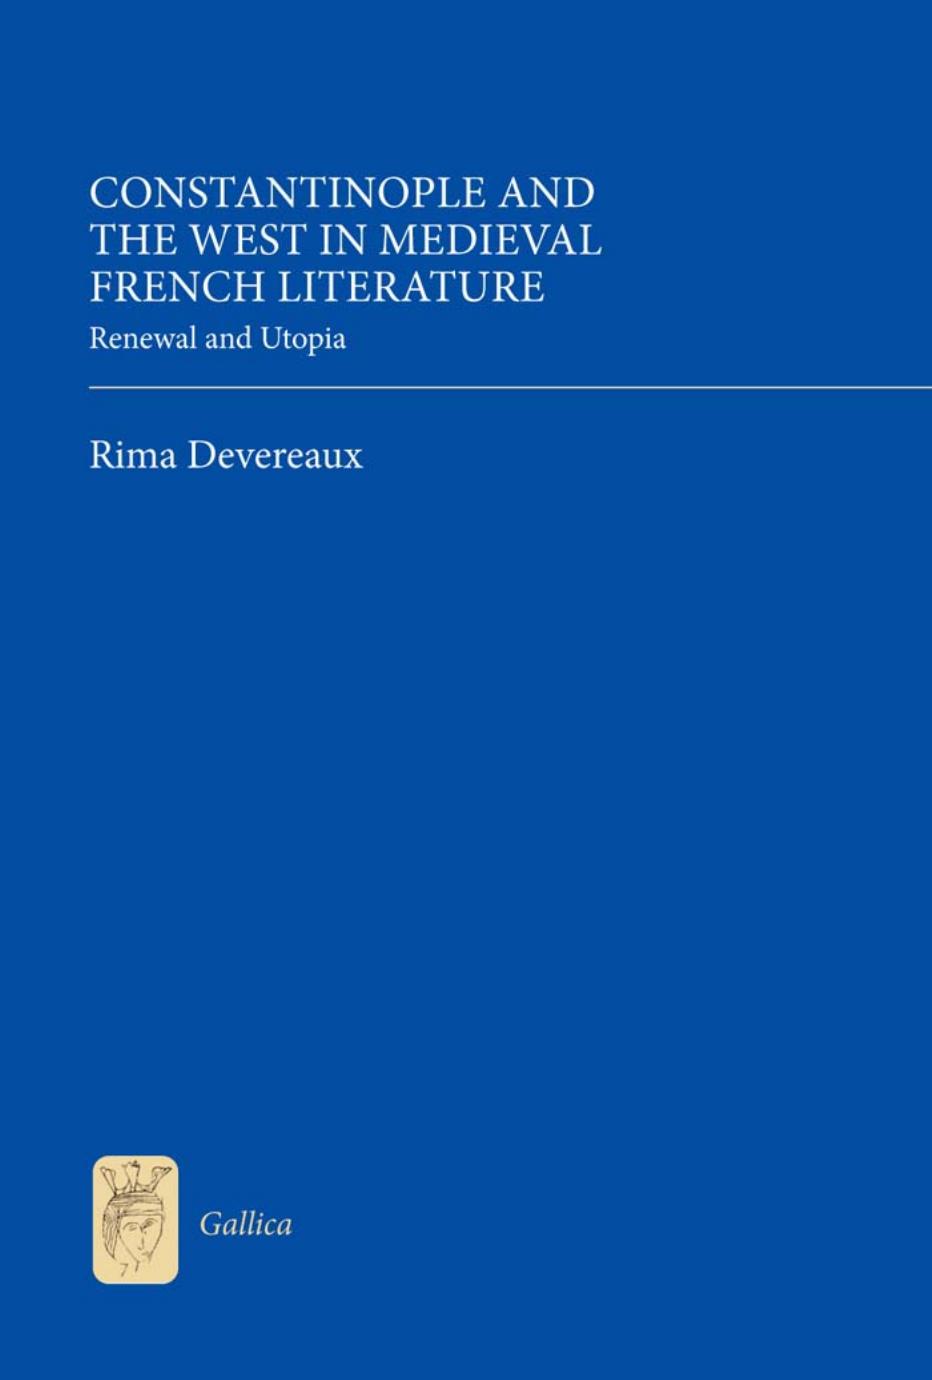 Constantinople and the West in Medieval French Literature: Renewal and Utopia by Rima Devereaux